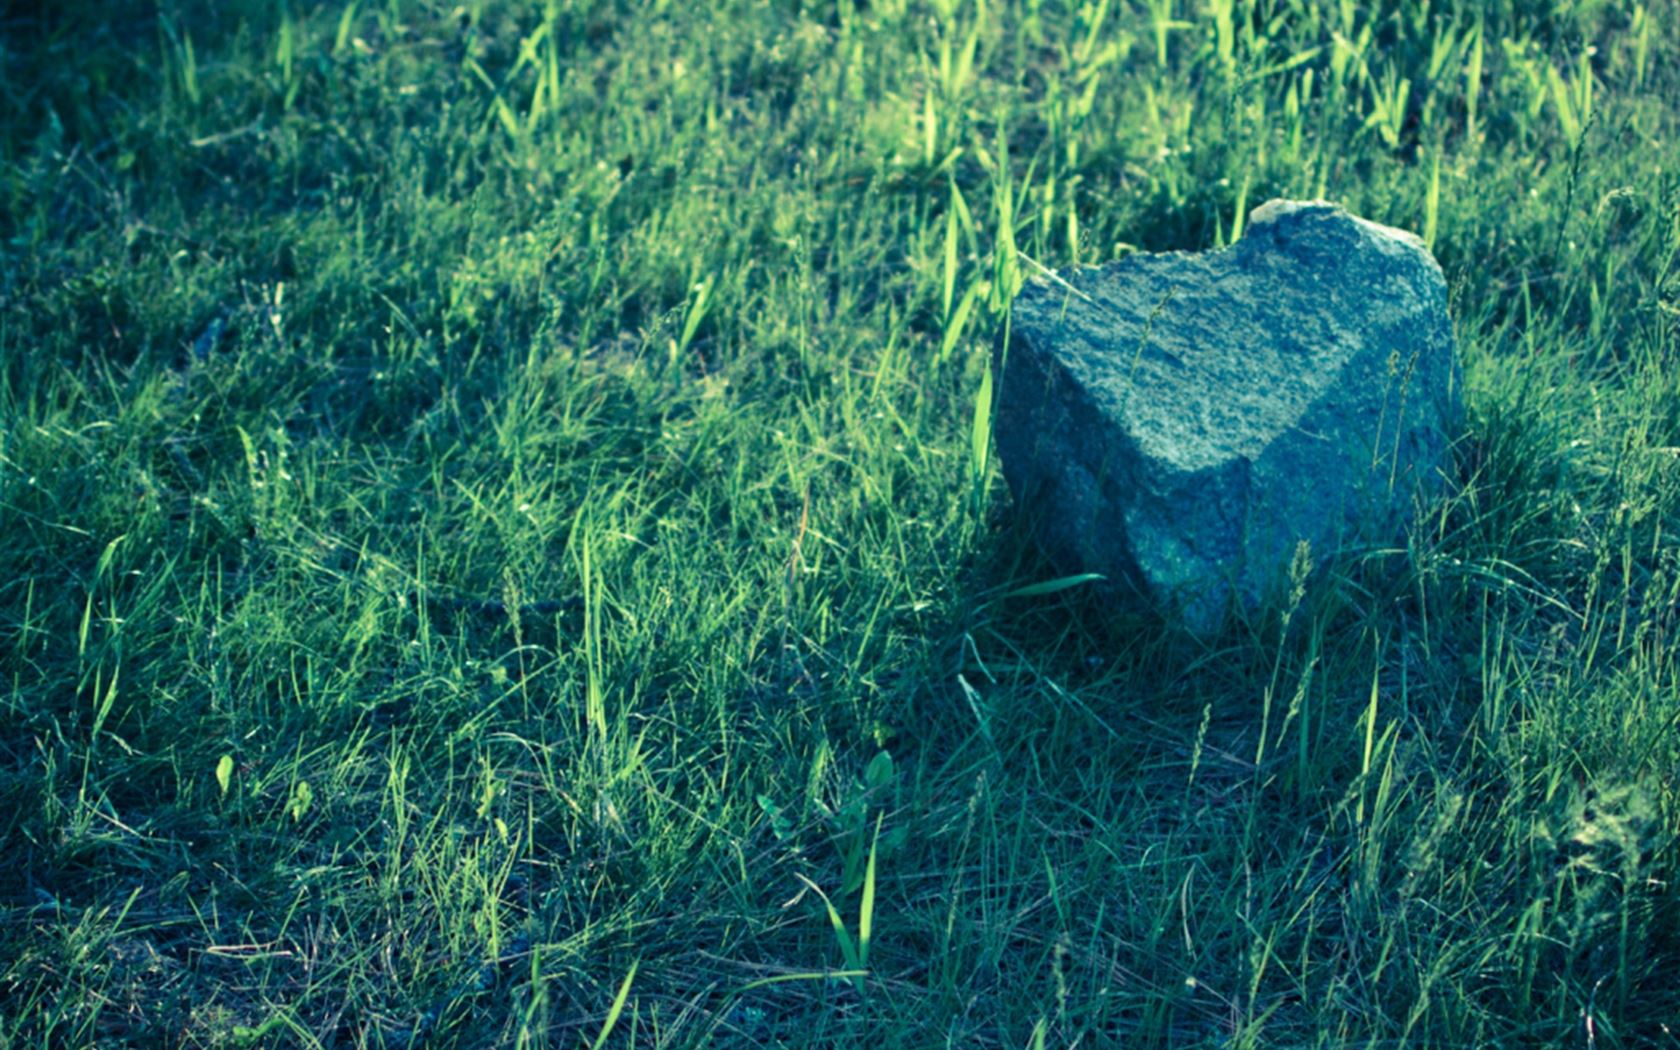 A Rock In A Field At Sunset iPad Air wallpaper 